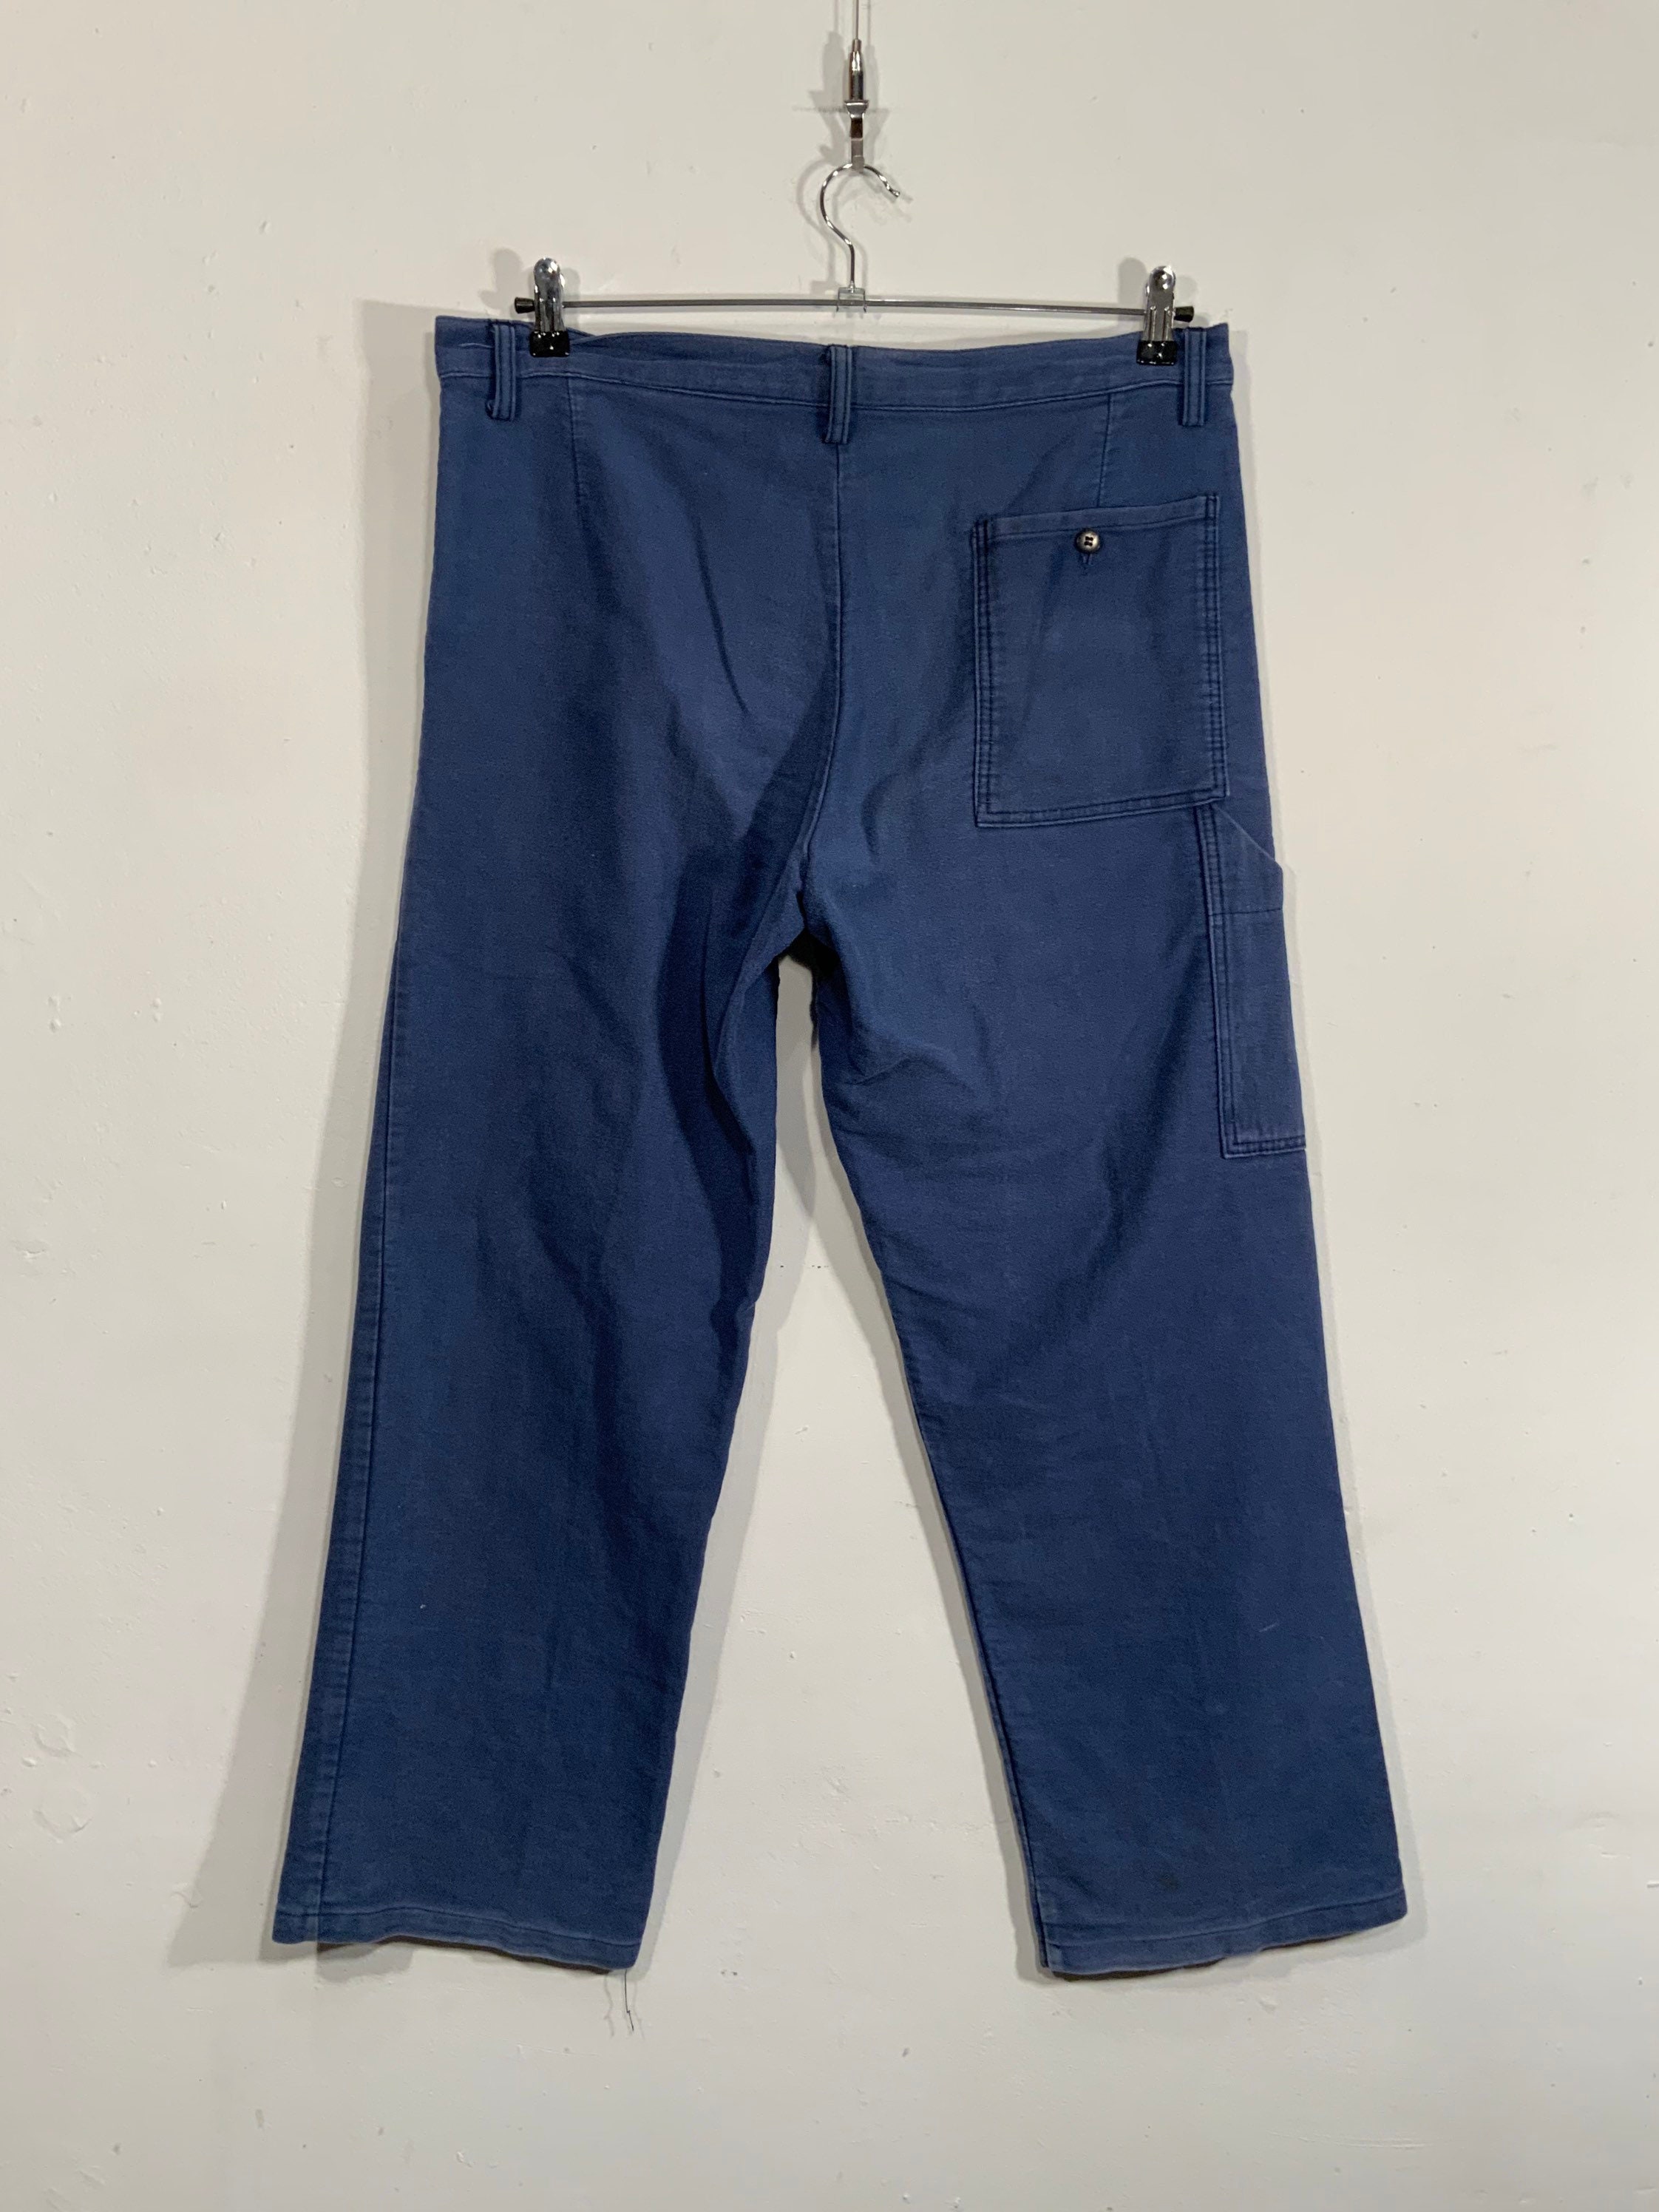 100% Cotton Workwear Factory Trouser, in Soft Electric Blue, Lots of ...